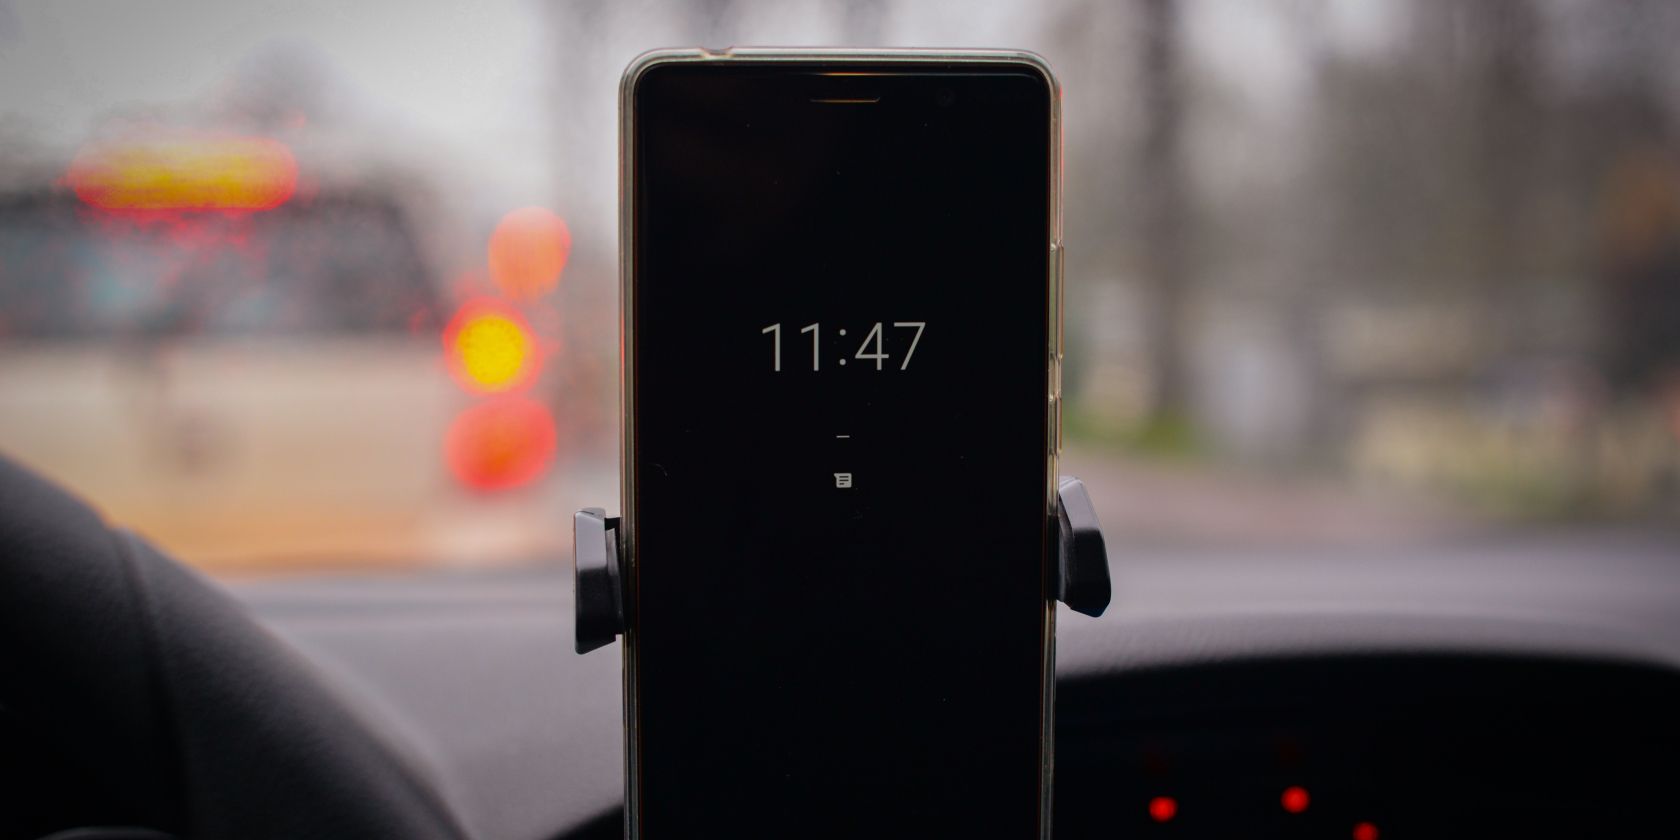 Phone in car mount displaying current time